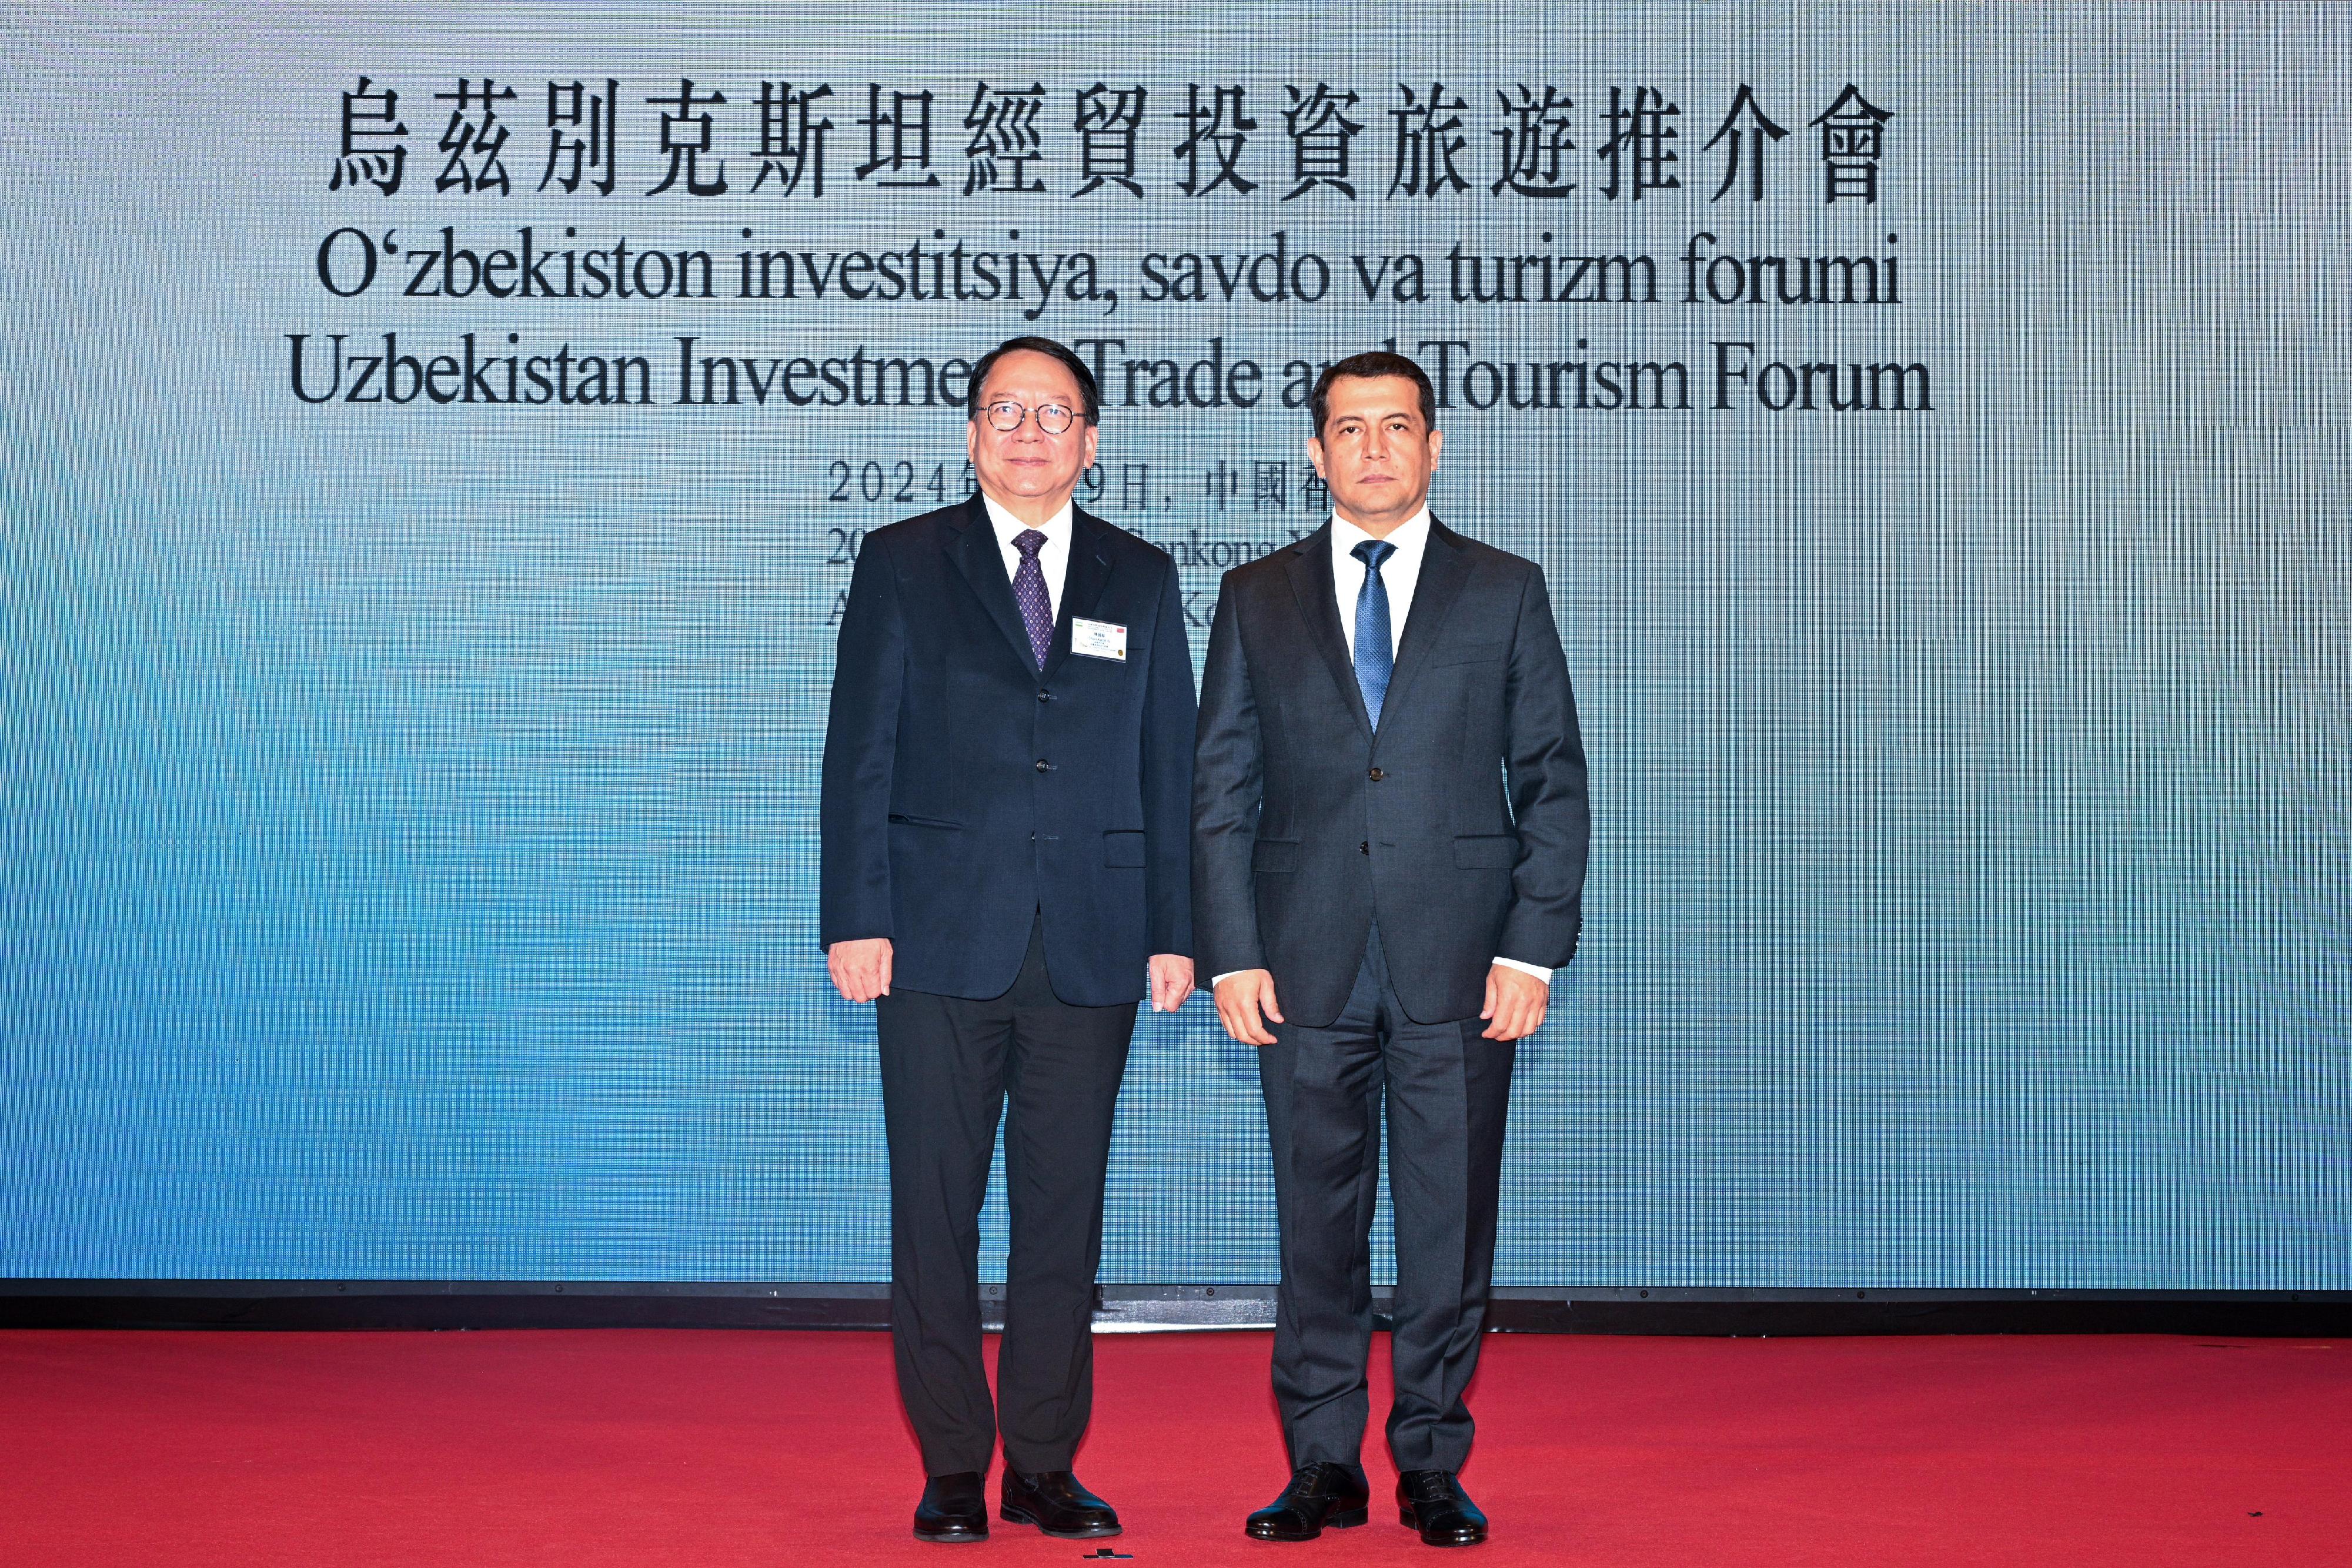 The Chief Secretary for Administration, Mr Chan Kwok-ki, attended the Uzbekistan Investment, Trade and Tourism Forum today (April 9). Photo shows Mr Chan (left) and the Ambassador Extraordinary and Plenipotentiary of the Republic of Uzbekistan to the People's Republic of China, Mr Farhod Arziev (right), at the event.